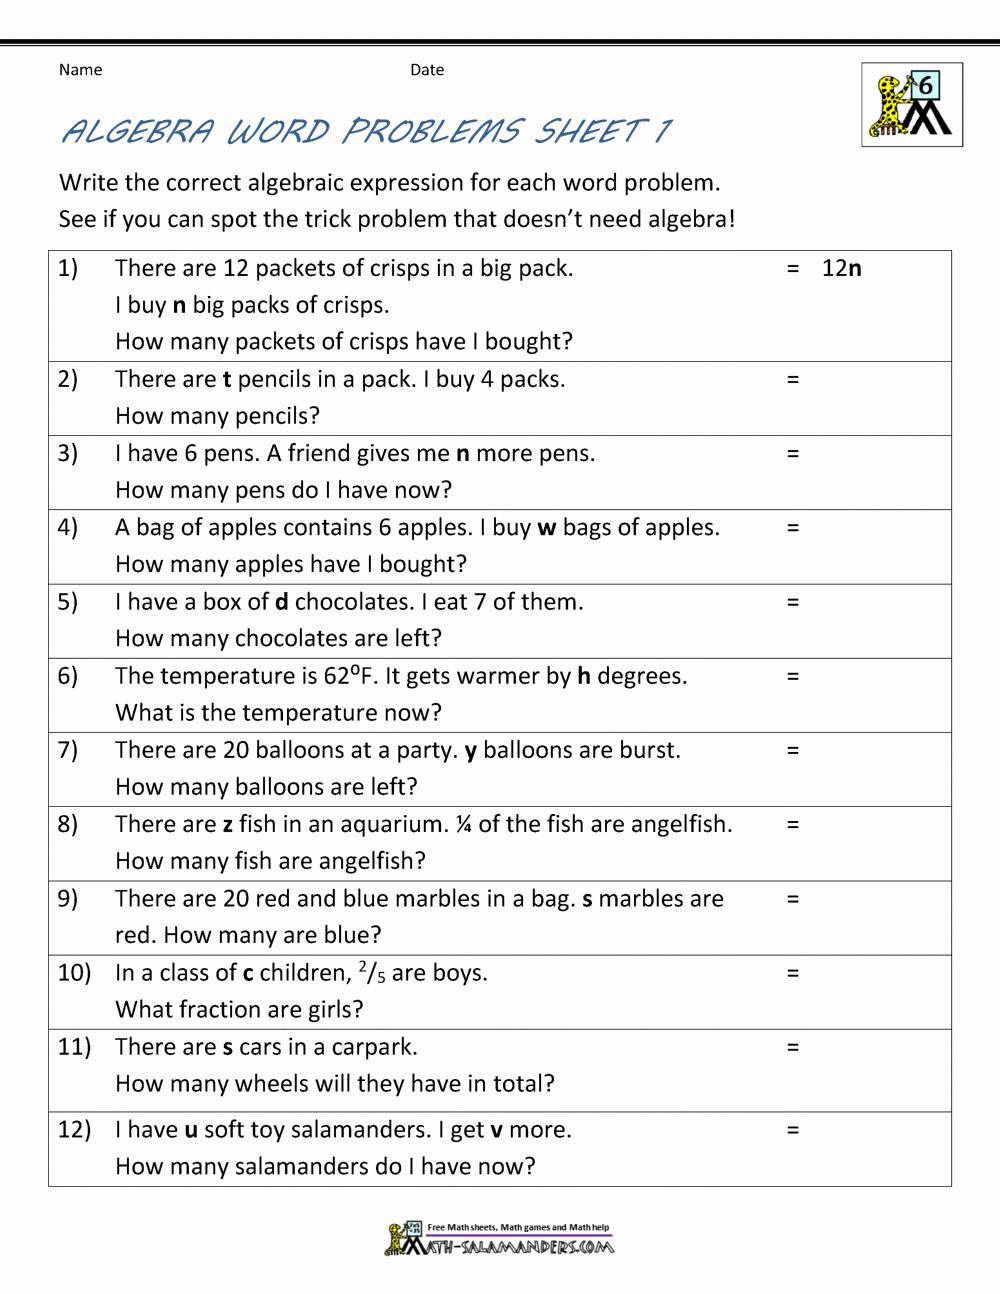 50 Equation Word Problems Worksheet Chessmuseum Template Library